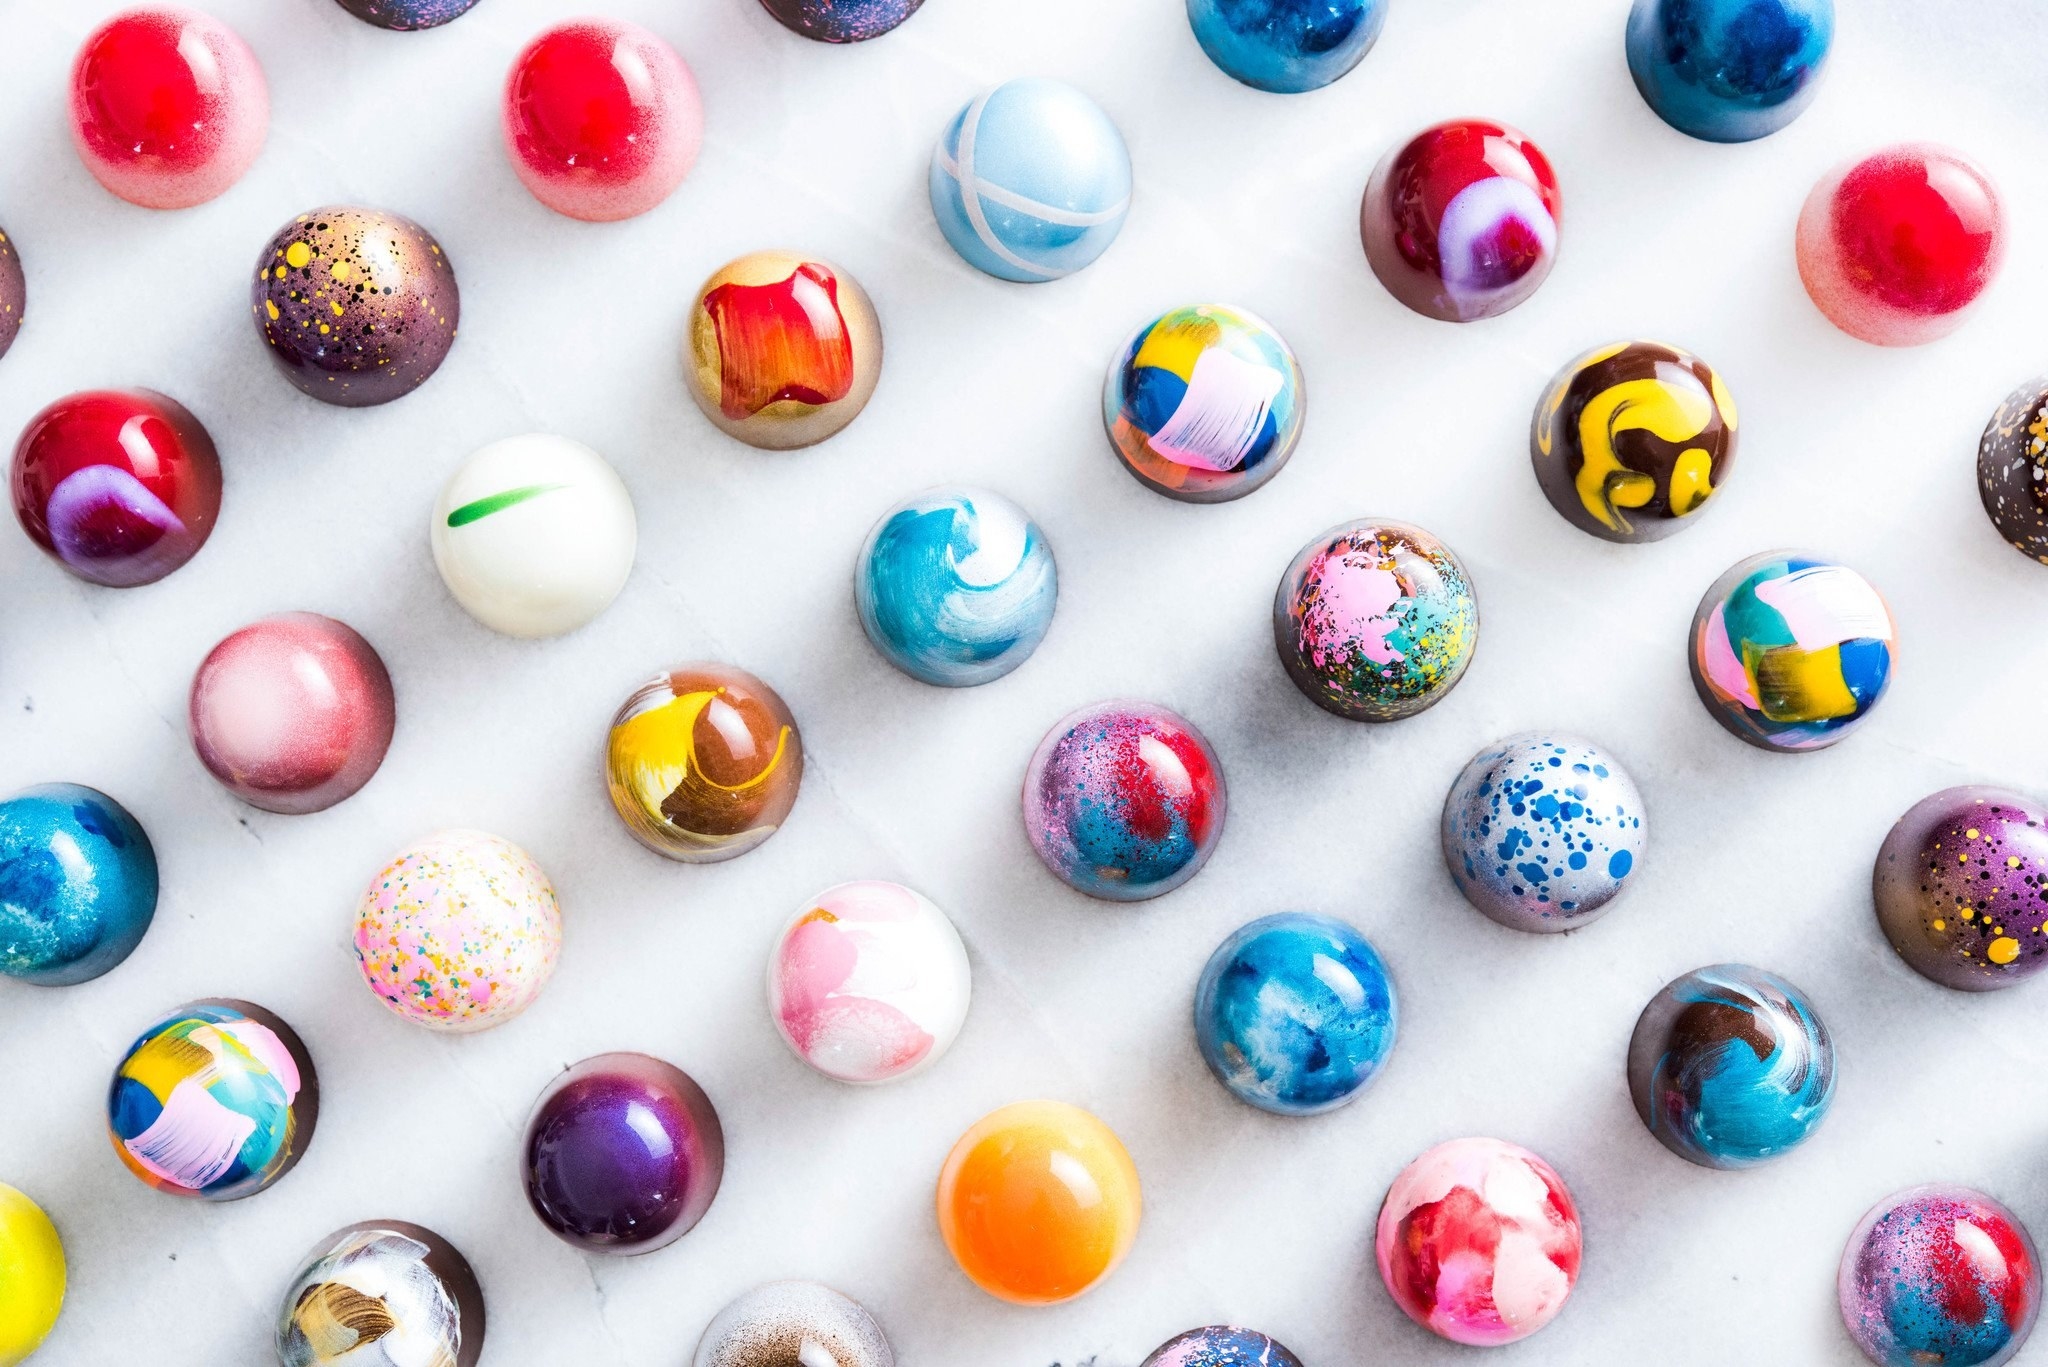 The colorful bonbons in a variety of flavors